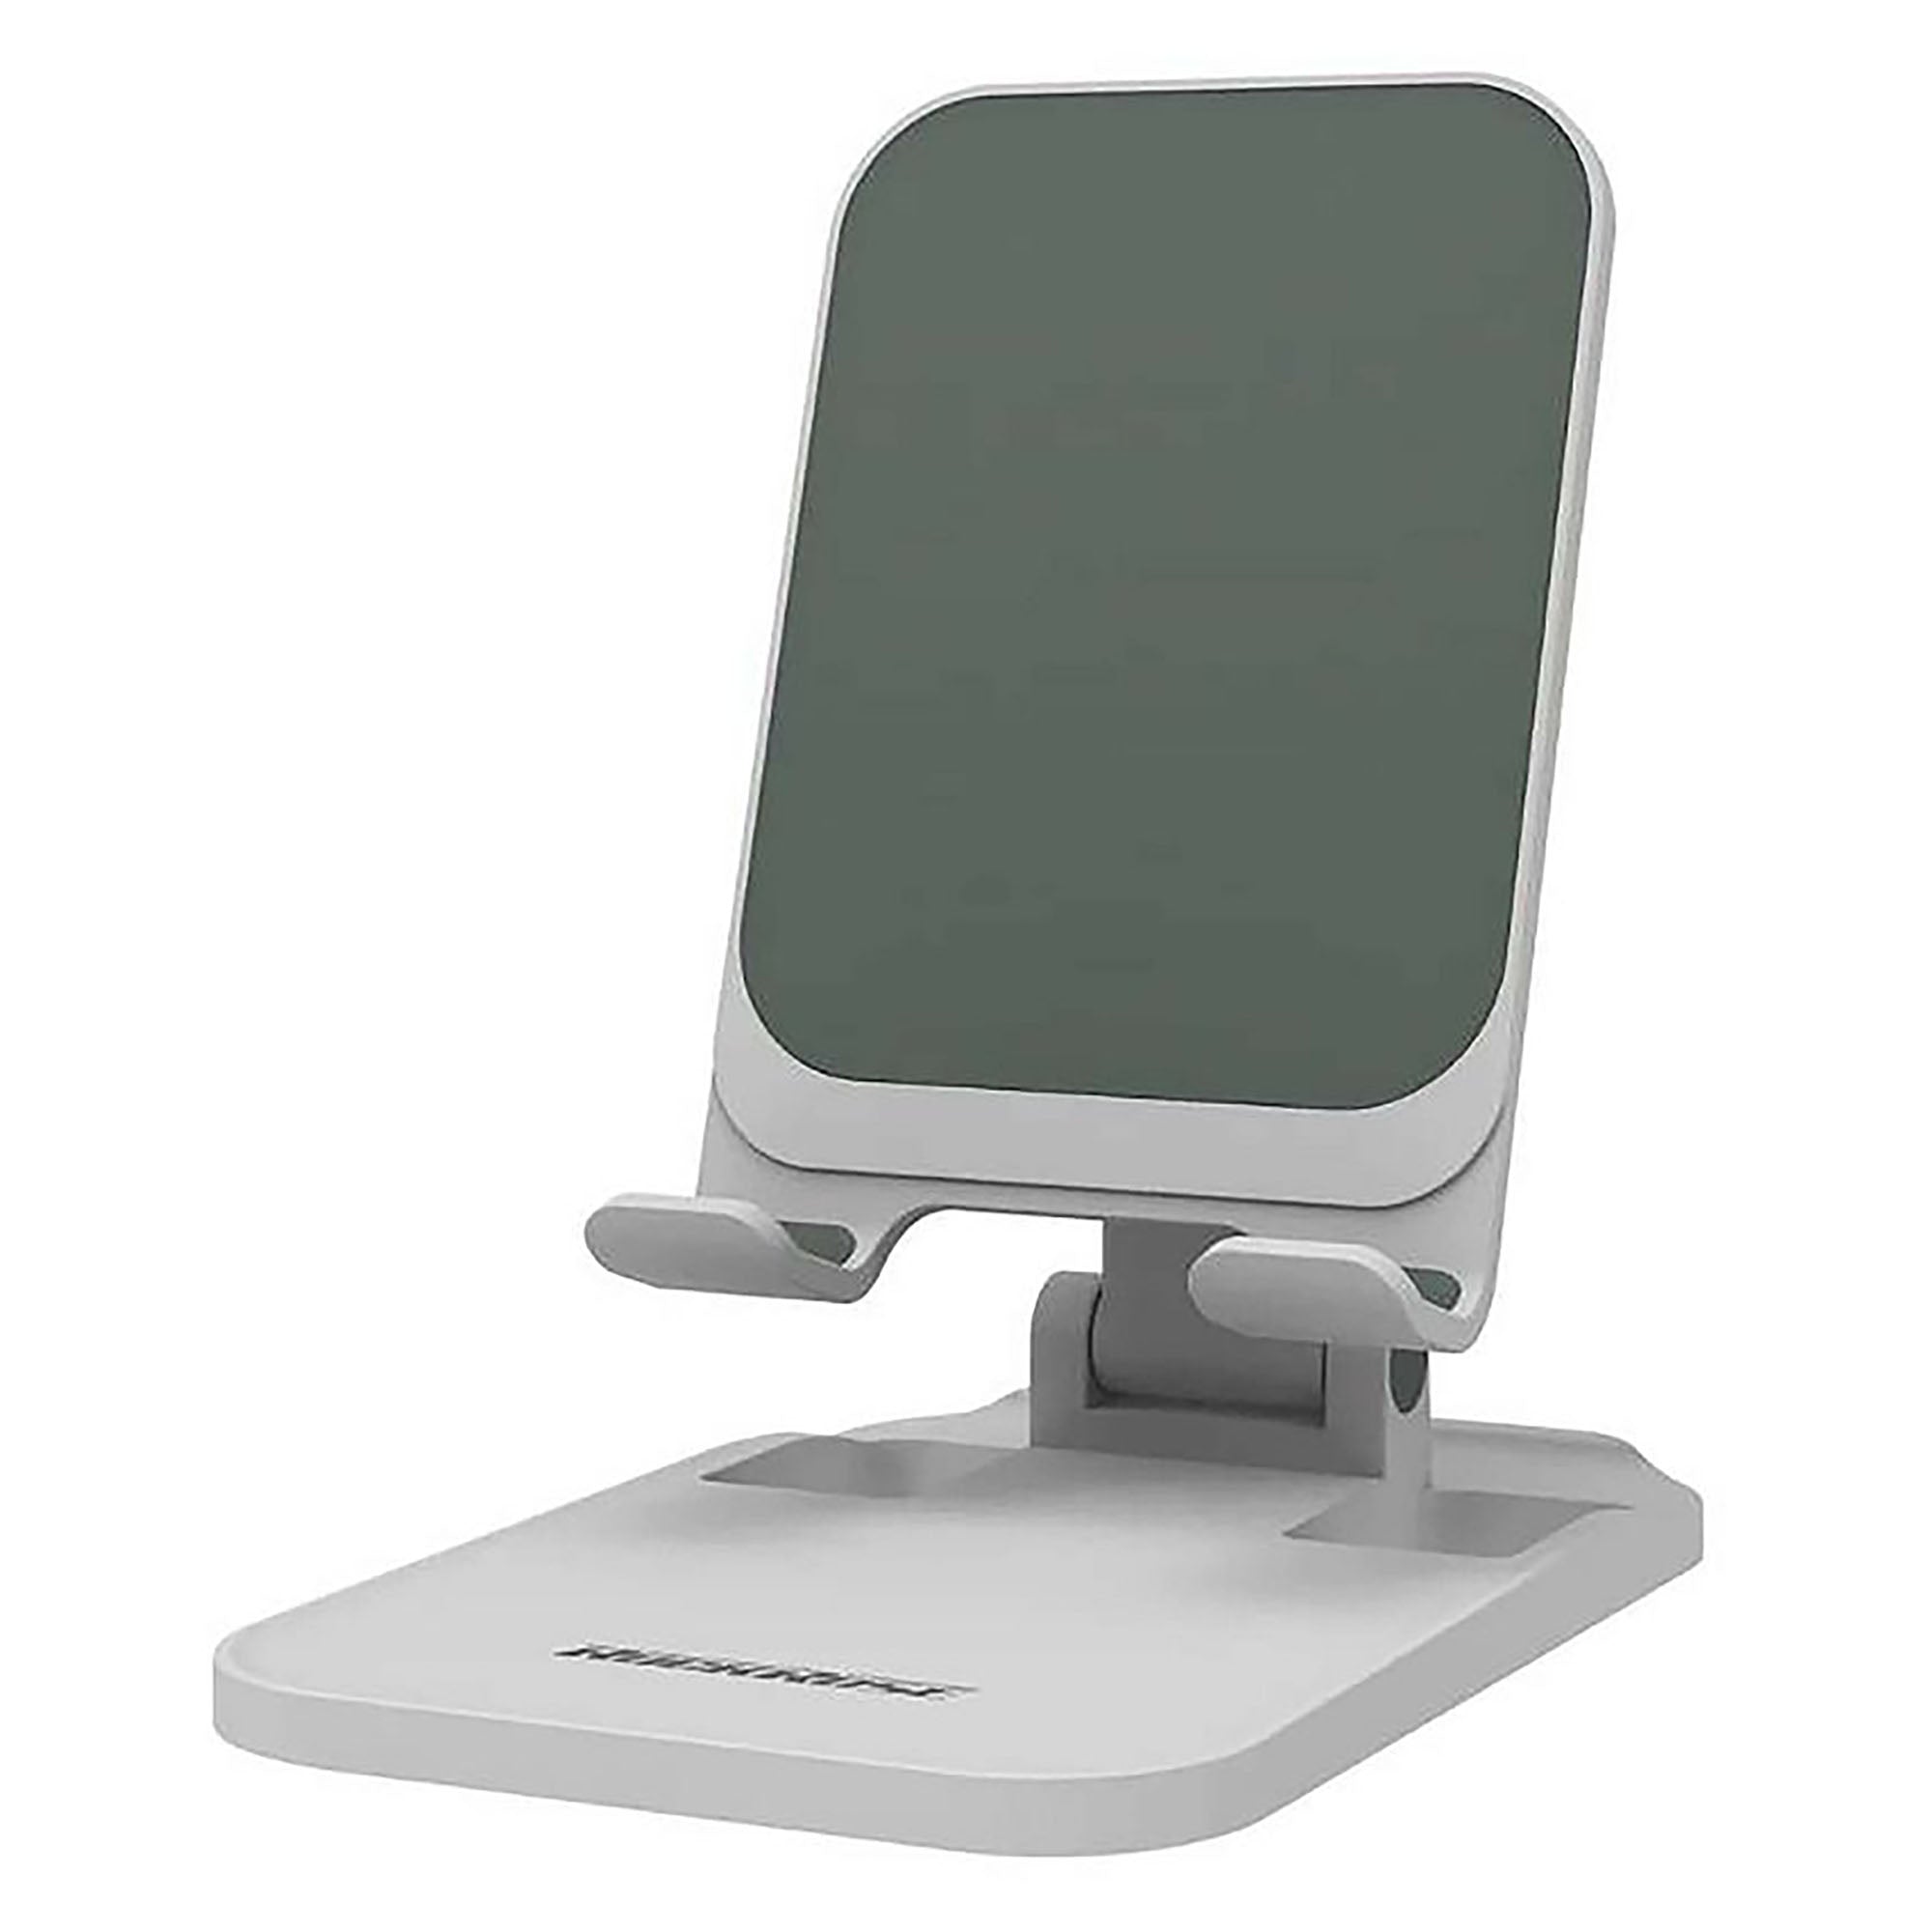 RockRose Any view Ease Foldable Desktop Phone Stand